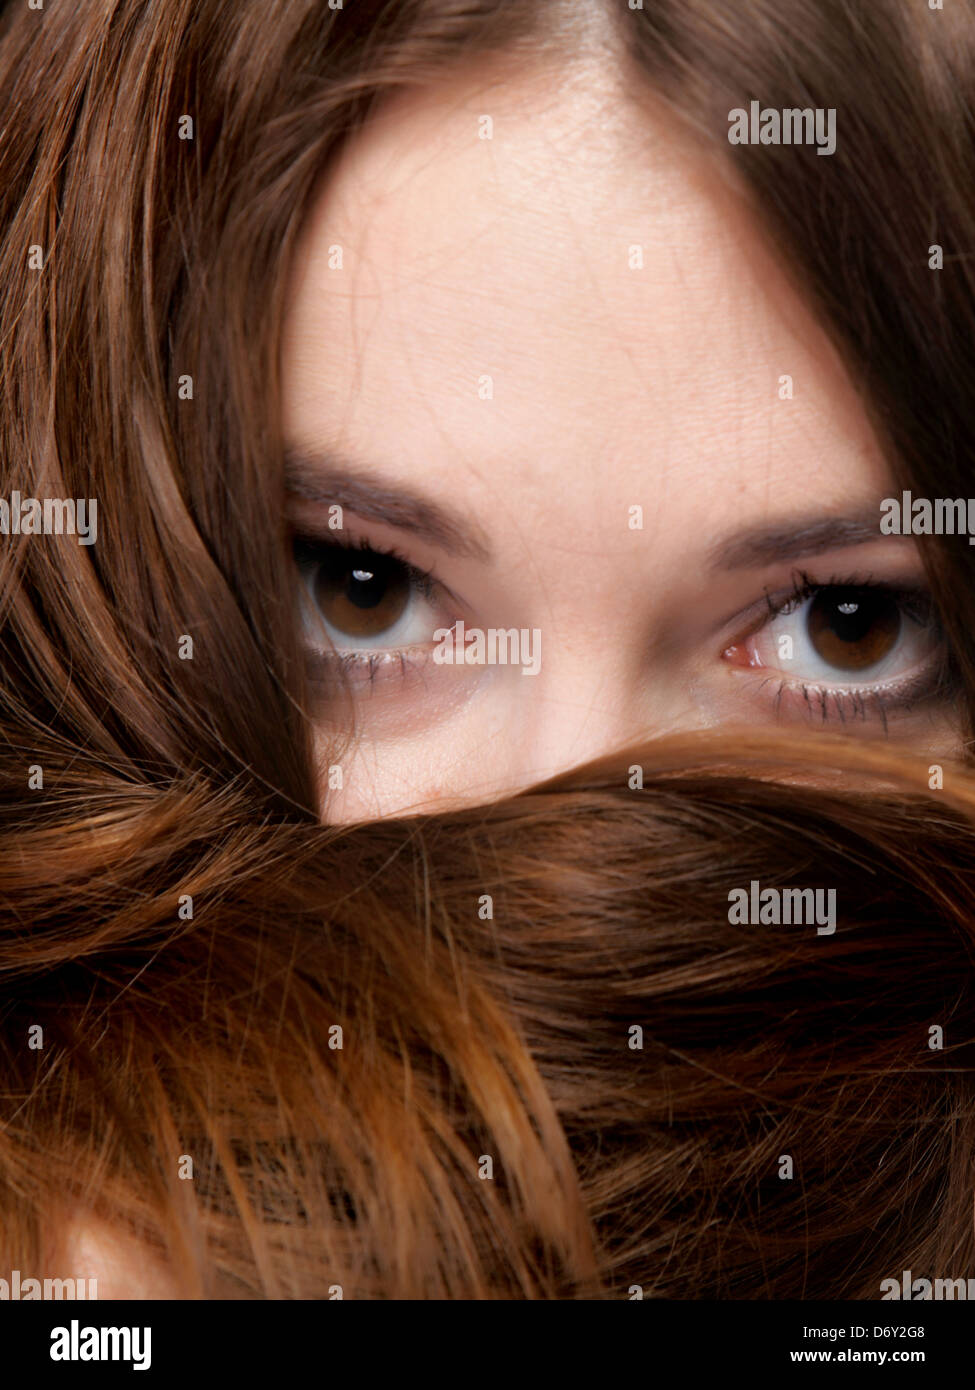 Close-up portrait of a beautiful woman covers the face by long brown hairs Stock Photo